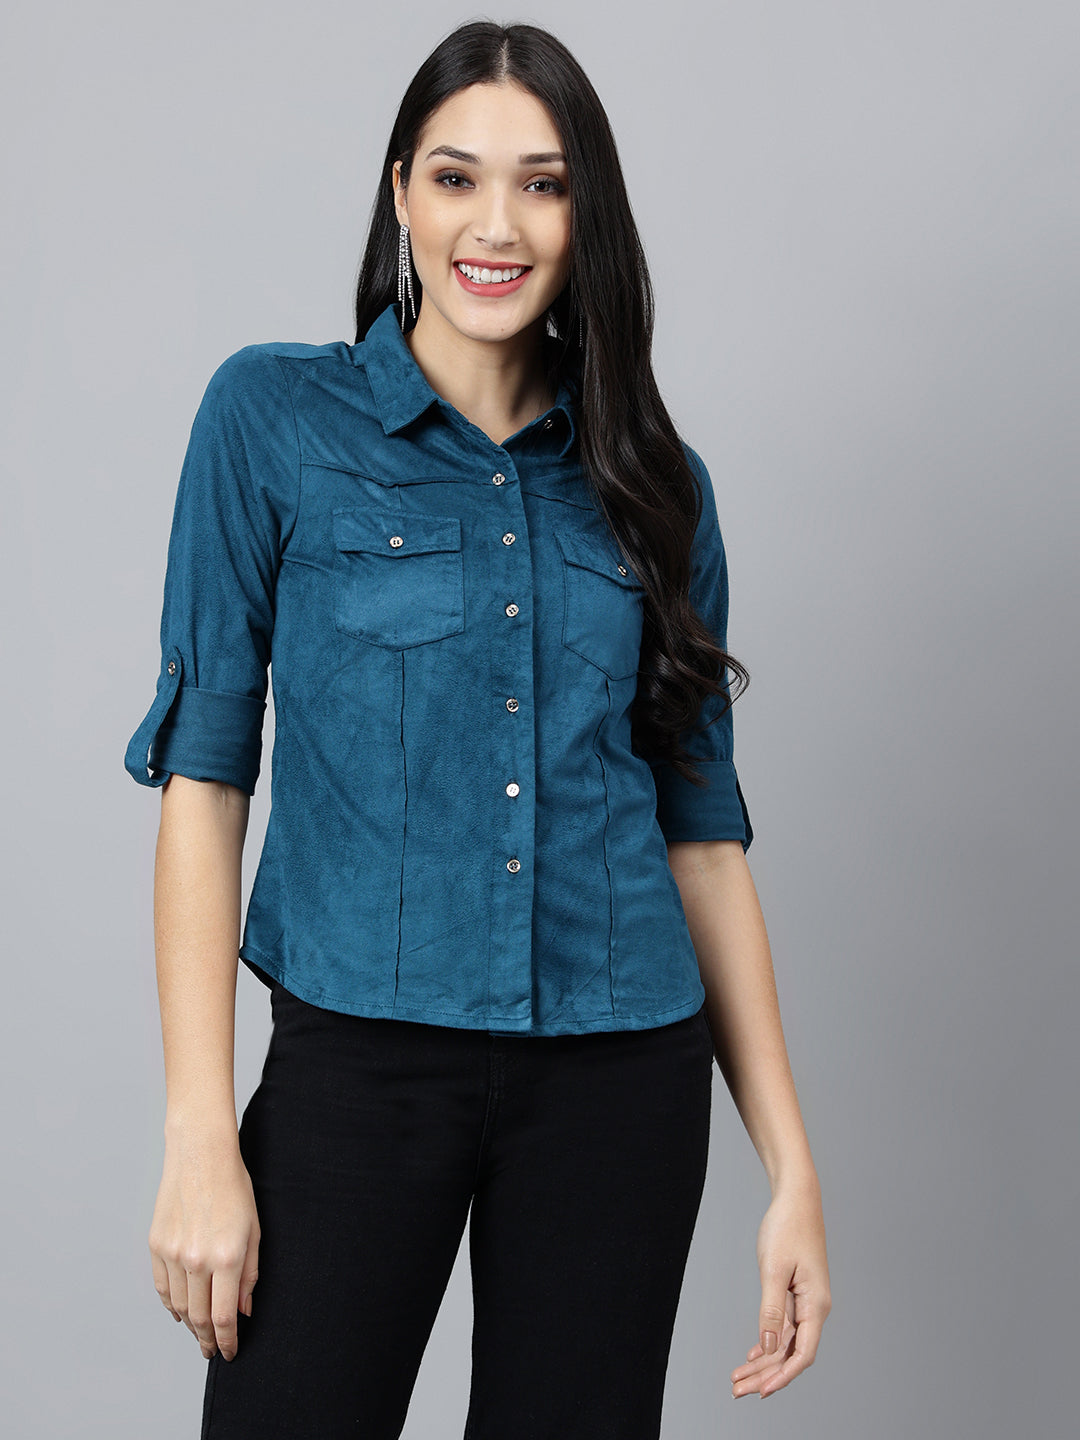 Teal Solid 3/4 Sleeve Casual Knit Top